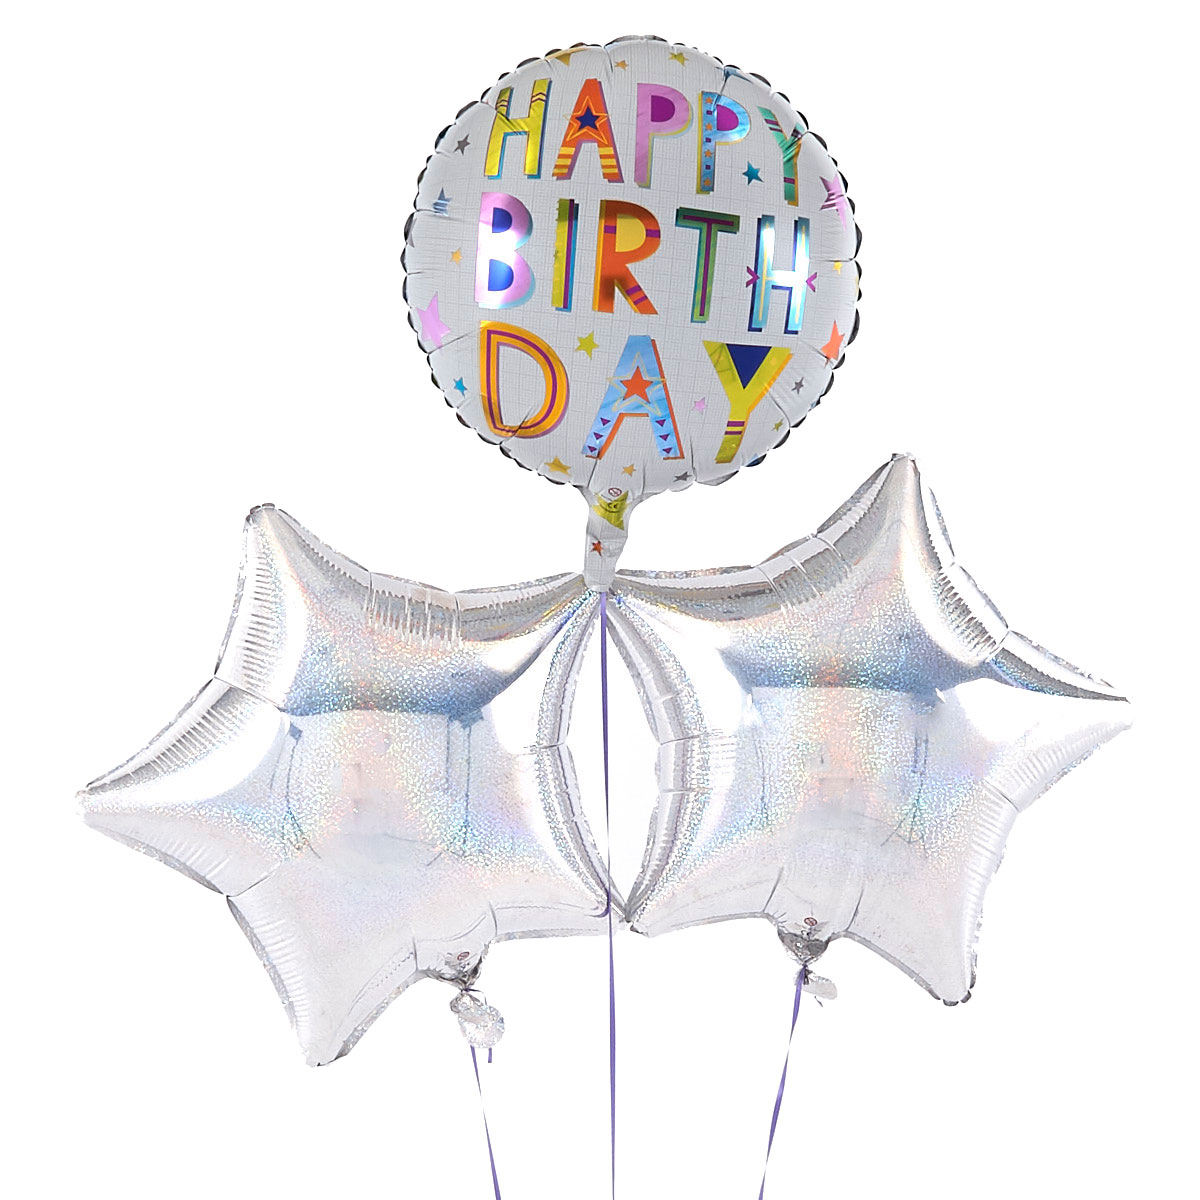 Happy Birthday Square Text Silver Balloon Bouquet - DELIVERED INFLATED!